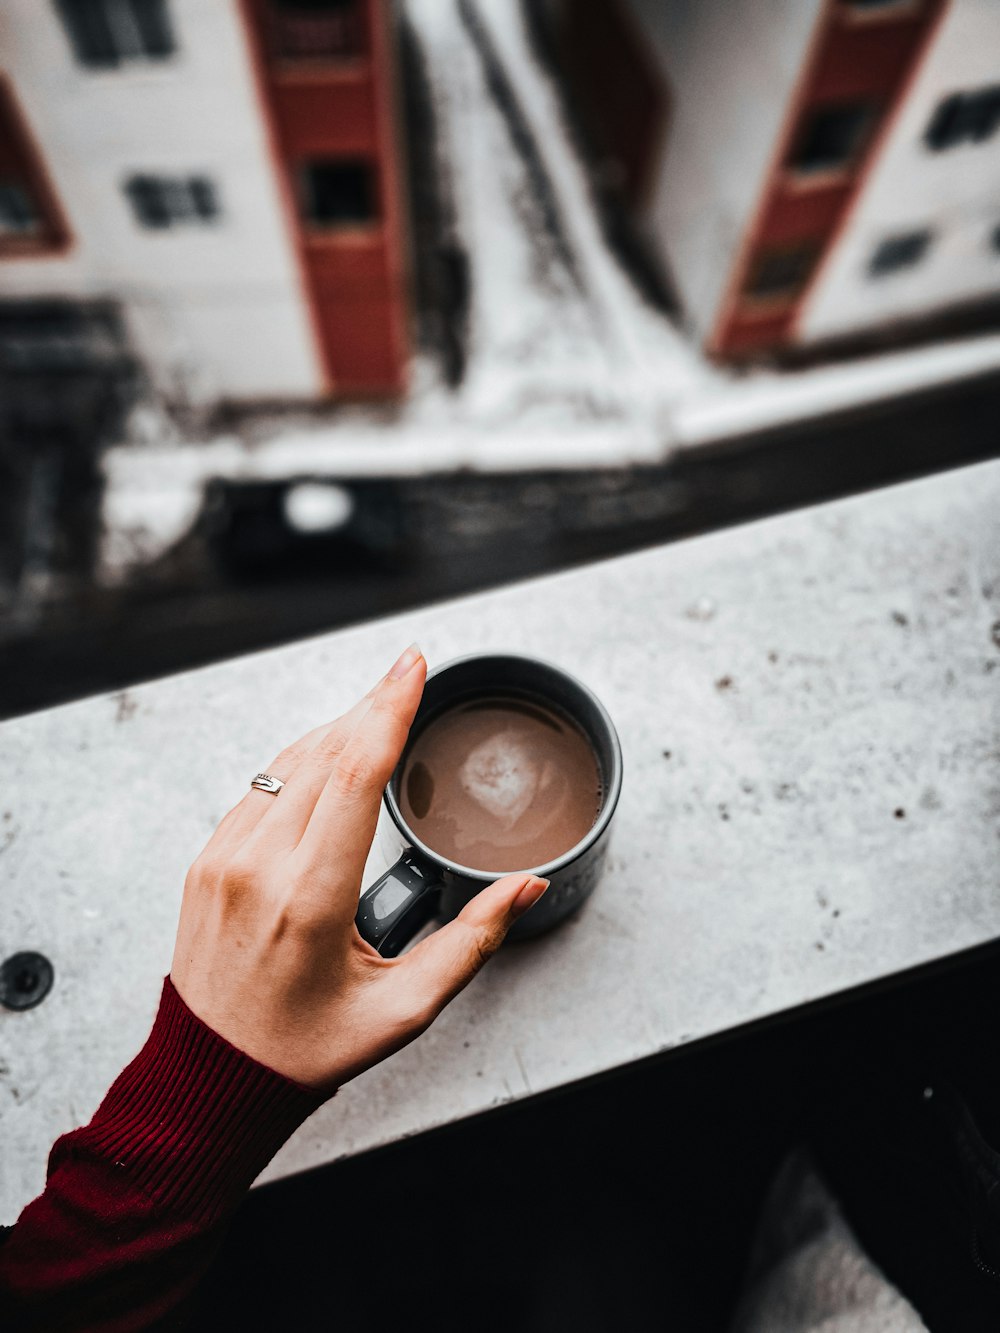 a person is holding a cup of coffee